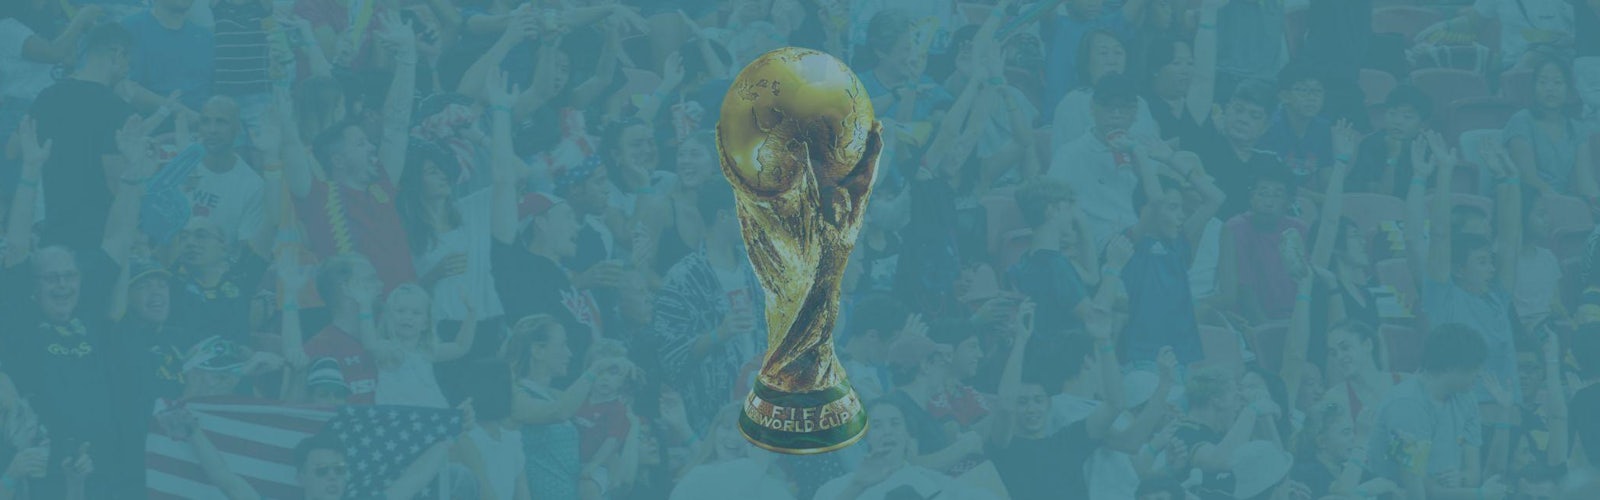 World Cup 2022 betting offers header image with trophy in the centre